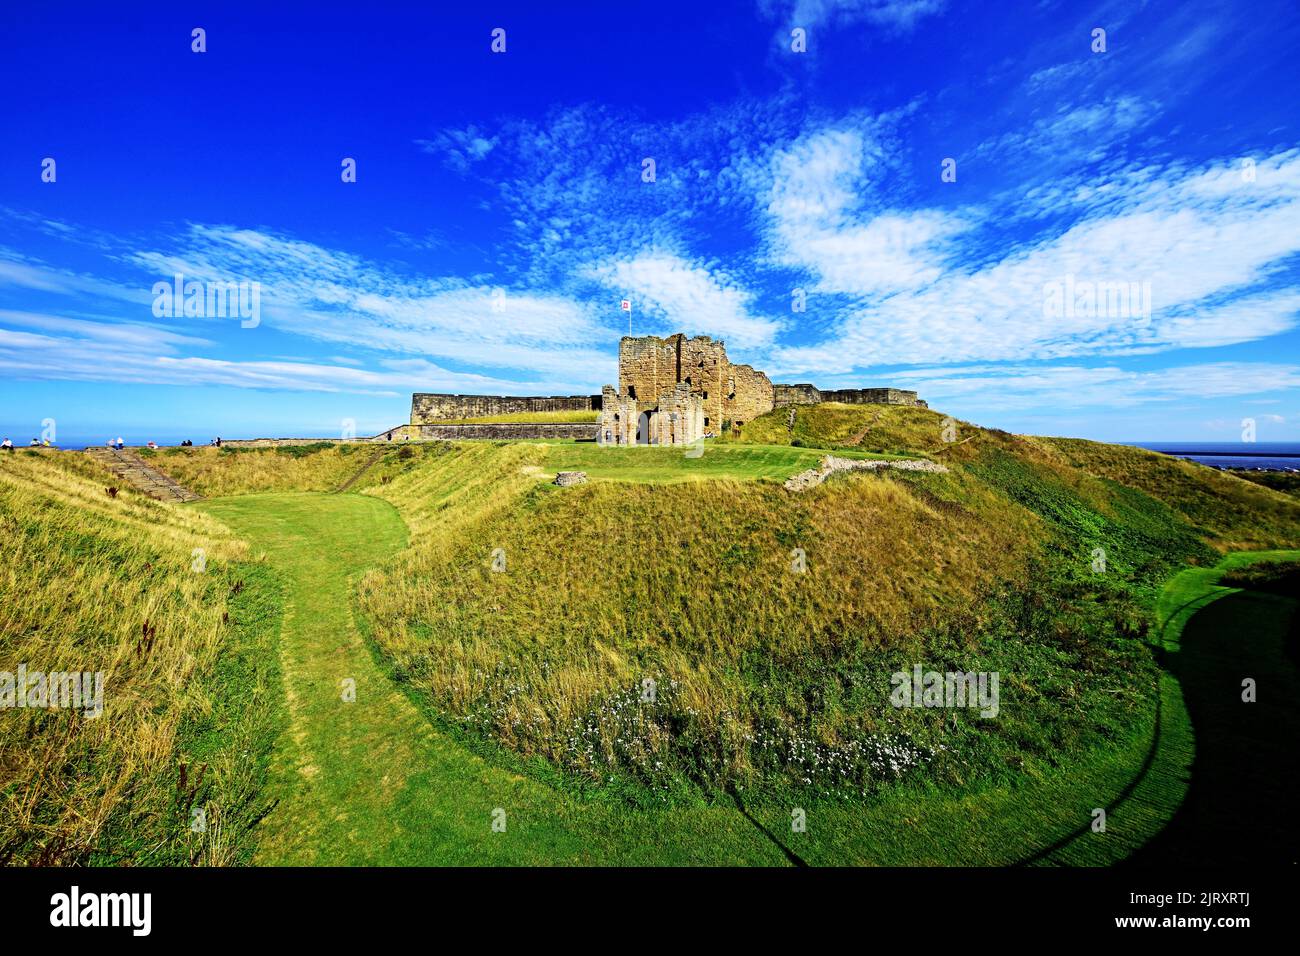 Tynemouth Castle and Priory also known as Pen Bal Crag with some visitors and a deep blue sky Stock Photo